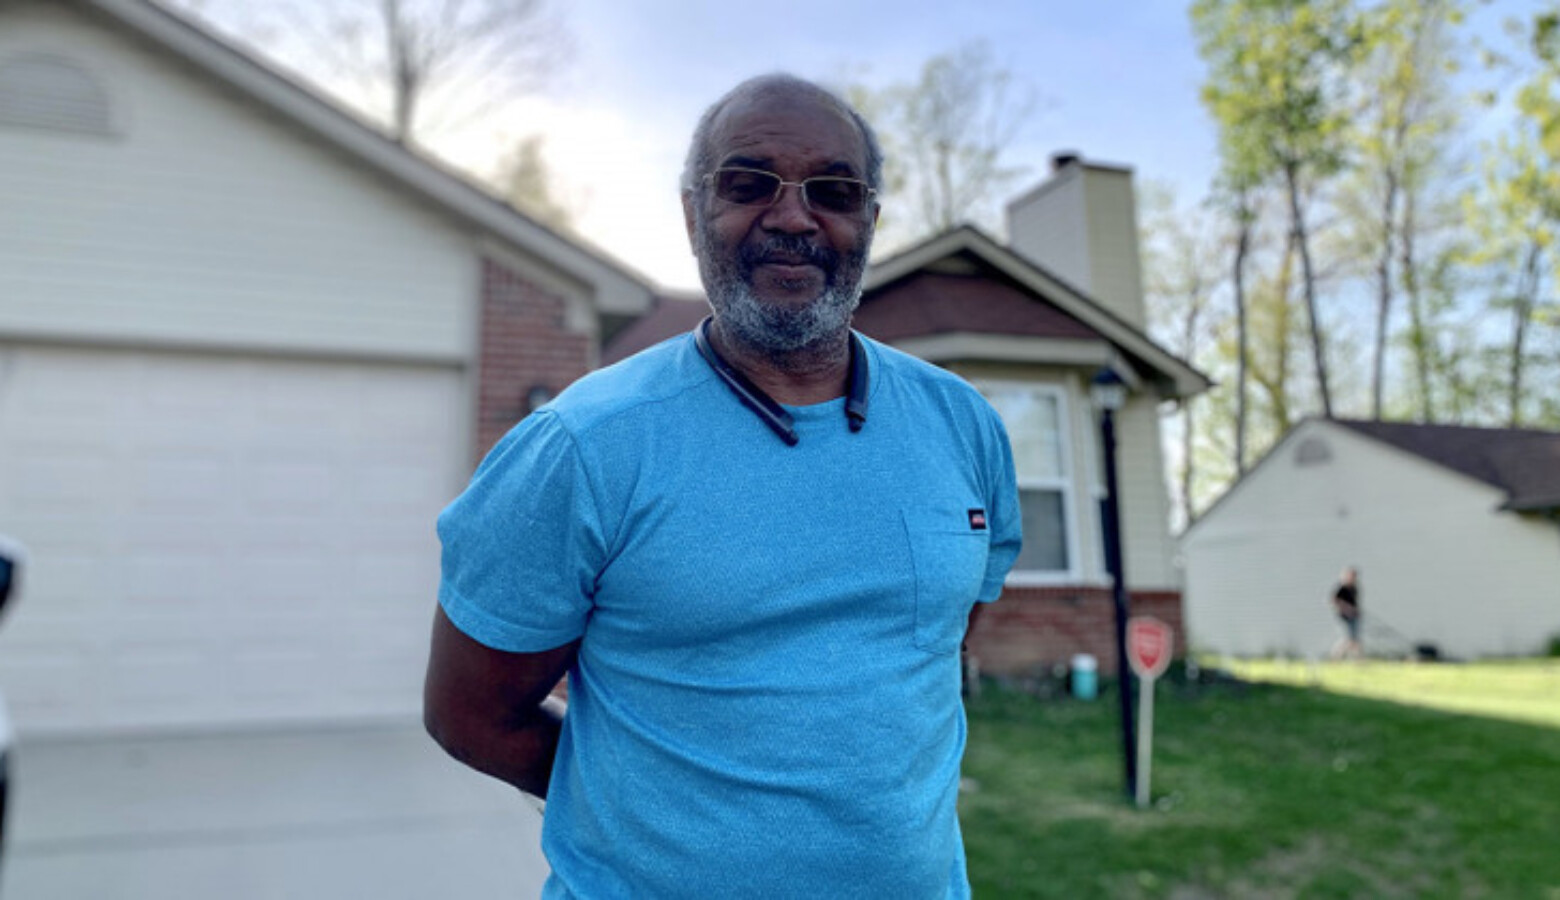 Ray Lay, who has been in recovery for more than a decade, is working to help others access the mental health care they need by volunteering at local hospitals and community organizations in Indianapolis.